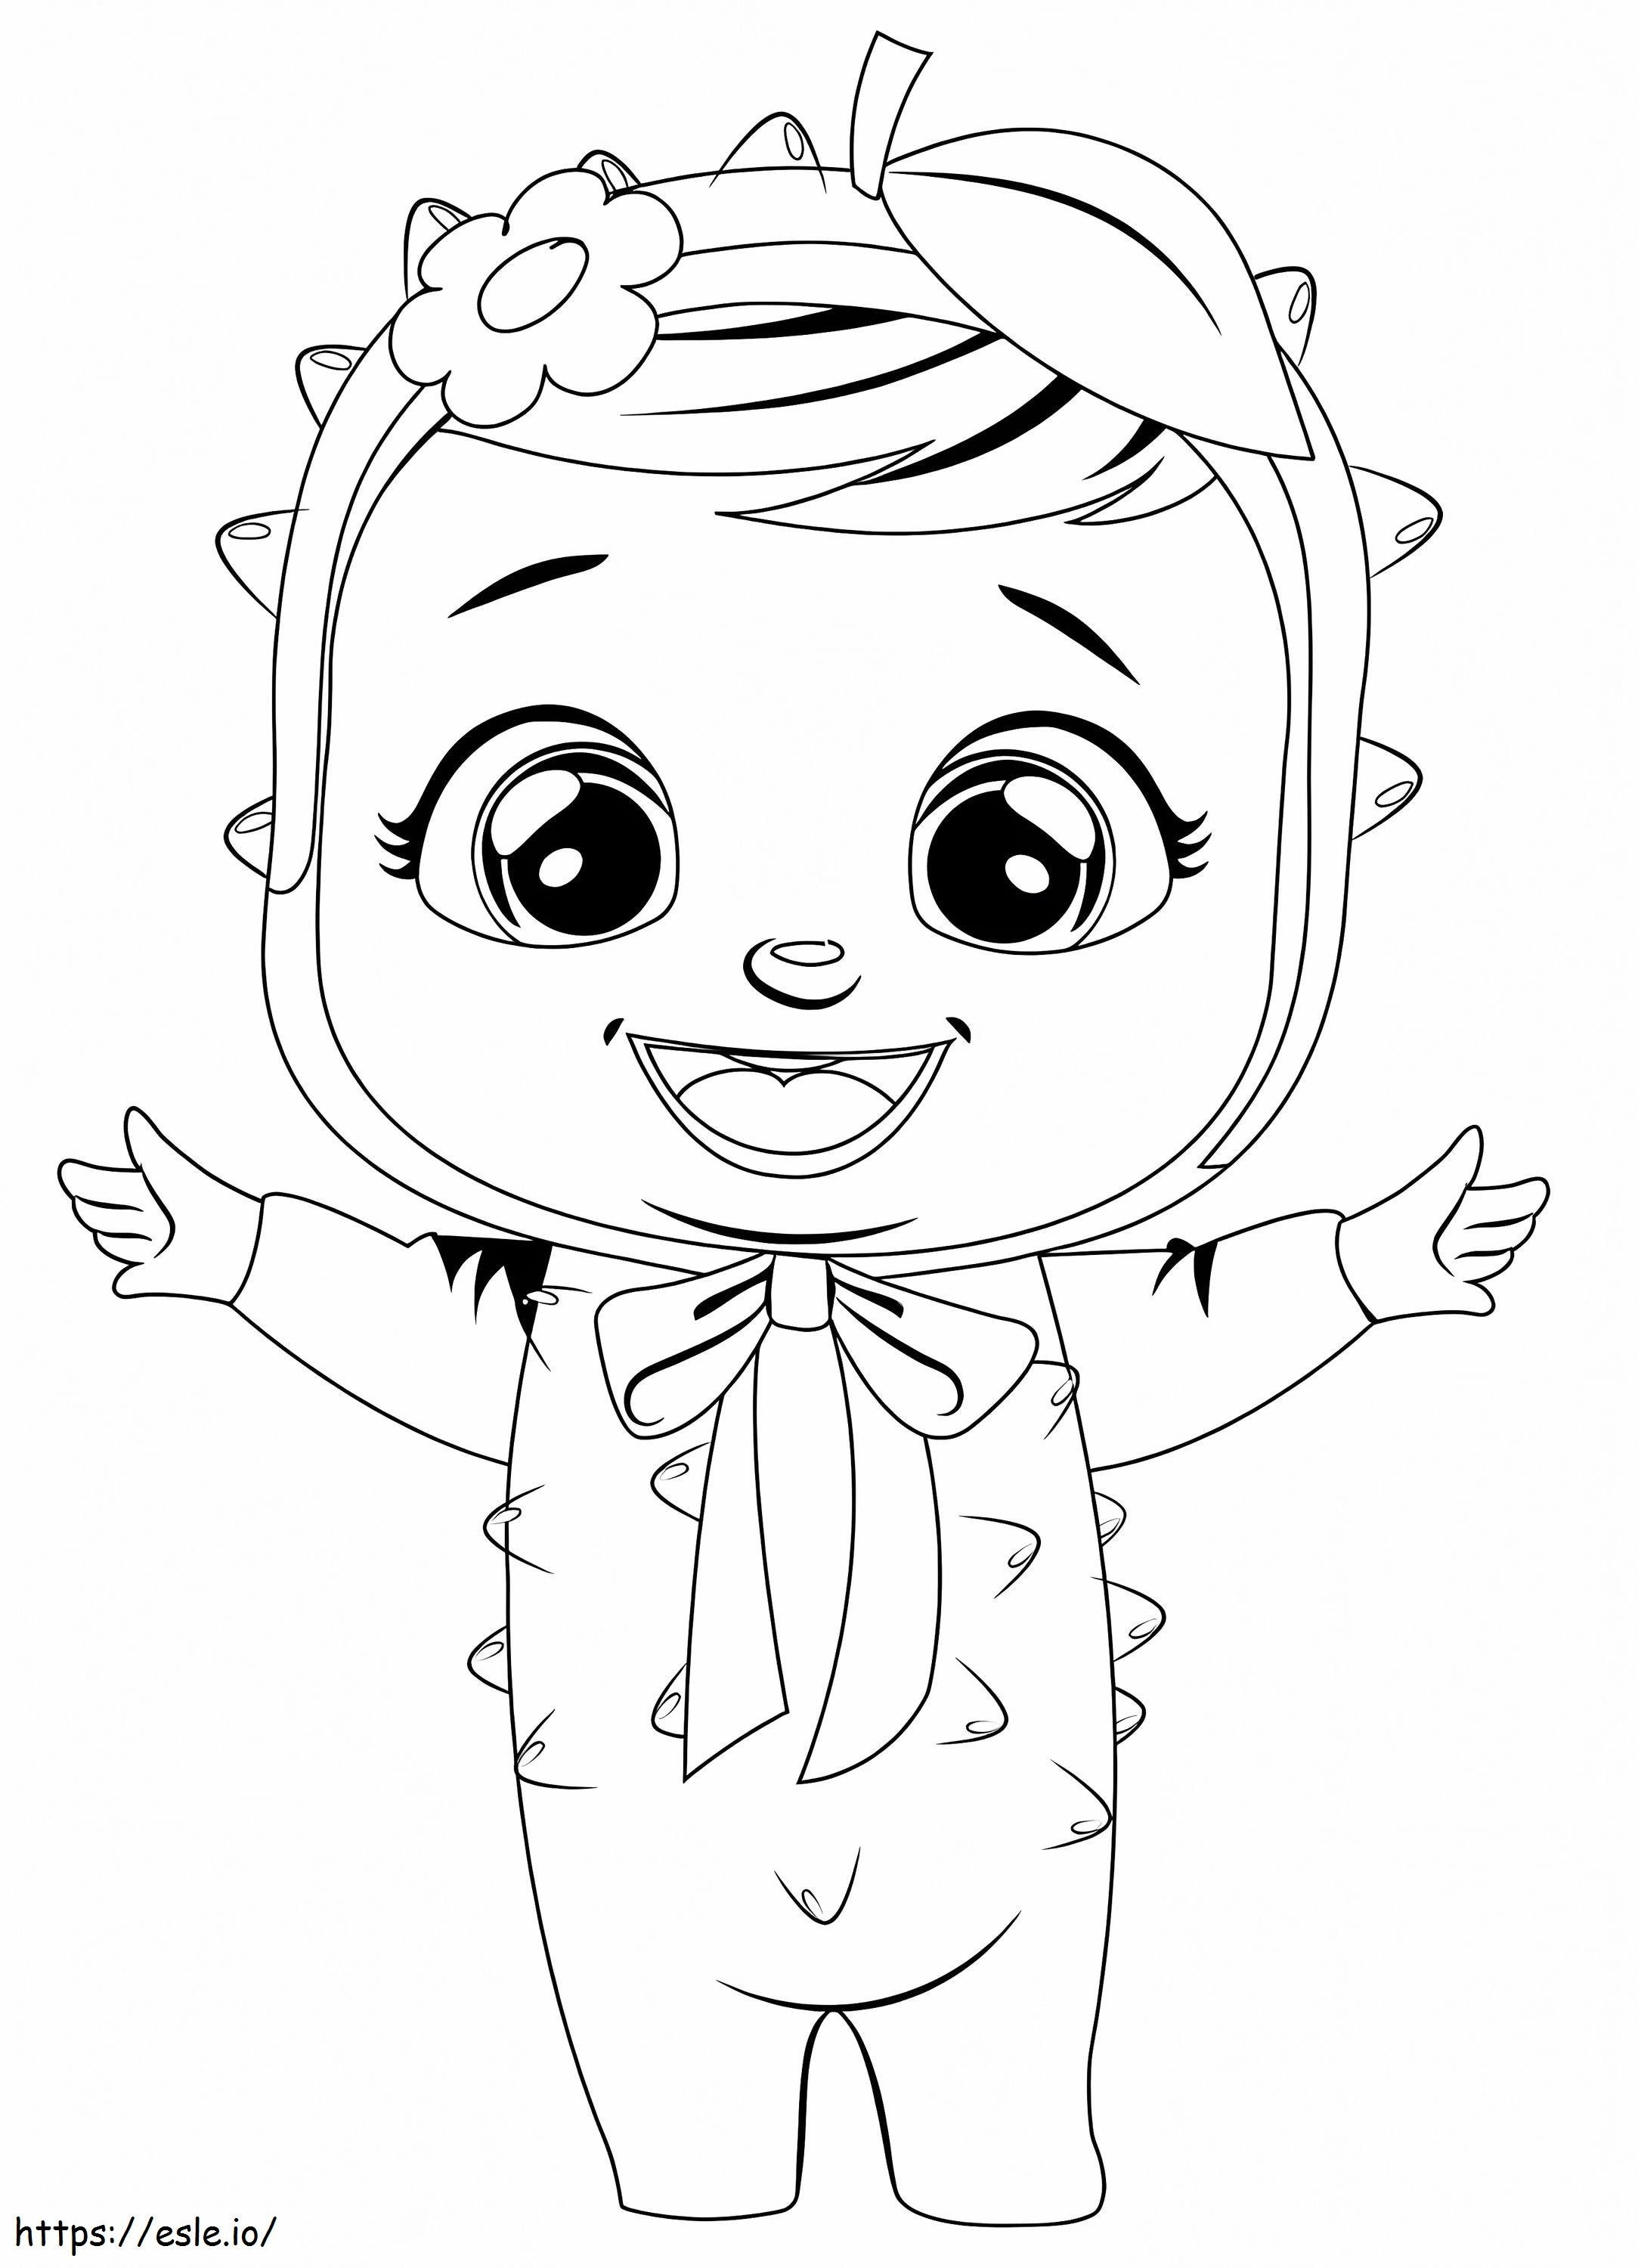 Lexi Cry Babie coloring page